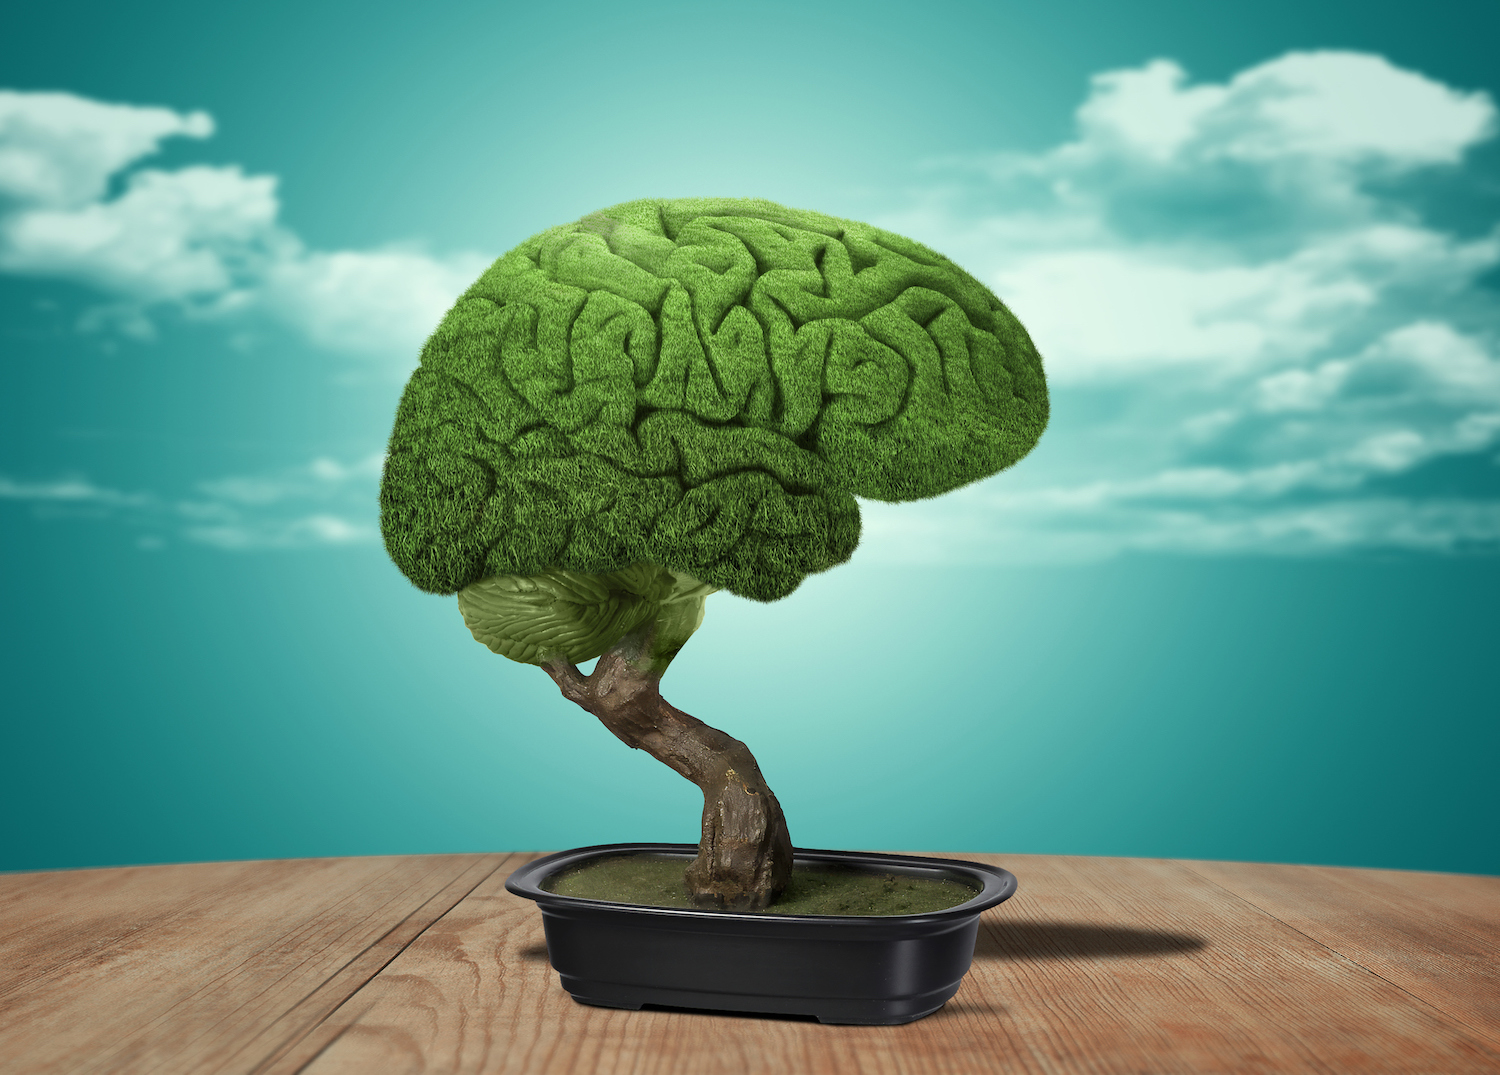 Brain covered with grass in the shape of a bonsai on a wooden table.Digital composite